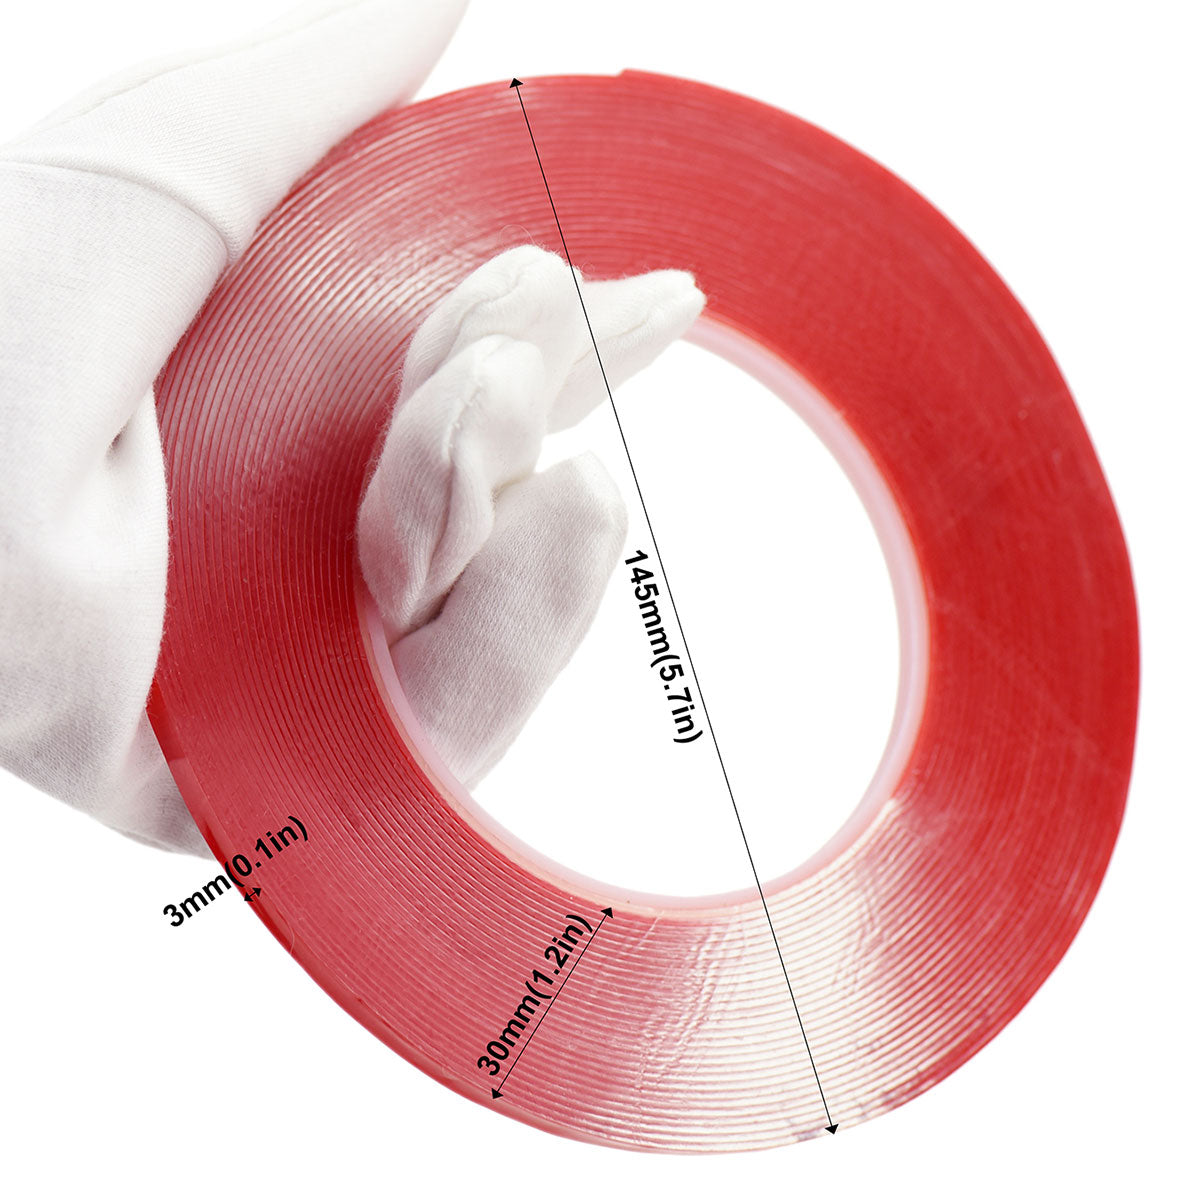 3mm x 1mm x 10 meters Multi-Purpose High Strength Transparent Acrylic Gel Adhesive Double Sided Tape Roll No Residue